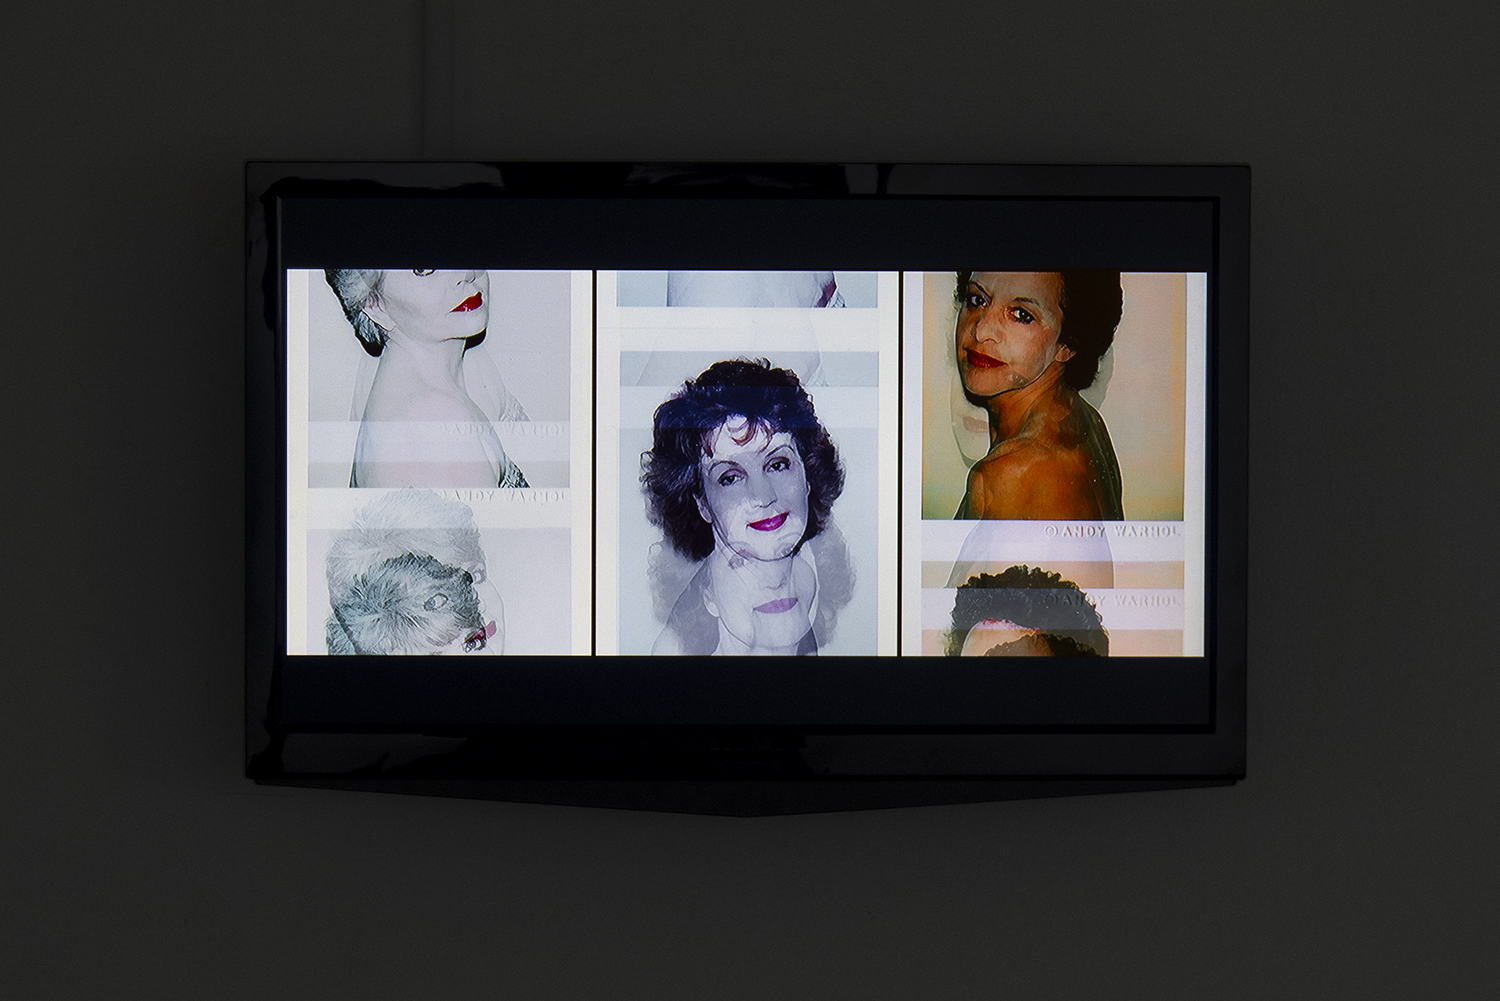 Jan Tichy, Polaroids (Warhol), (2012). Single-channel HD video. Running time: 20 minutes. Image courtesy of the artist and the MoCP.